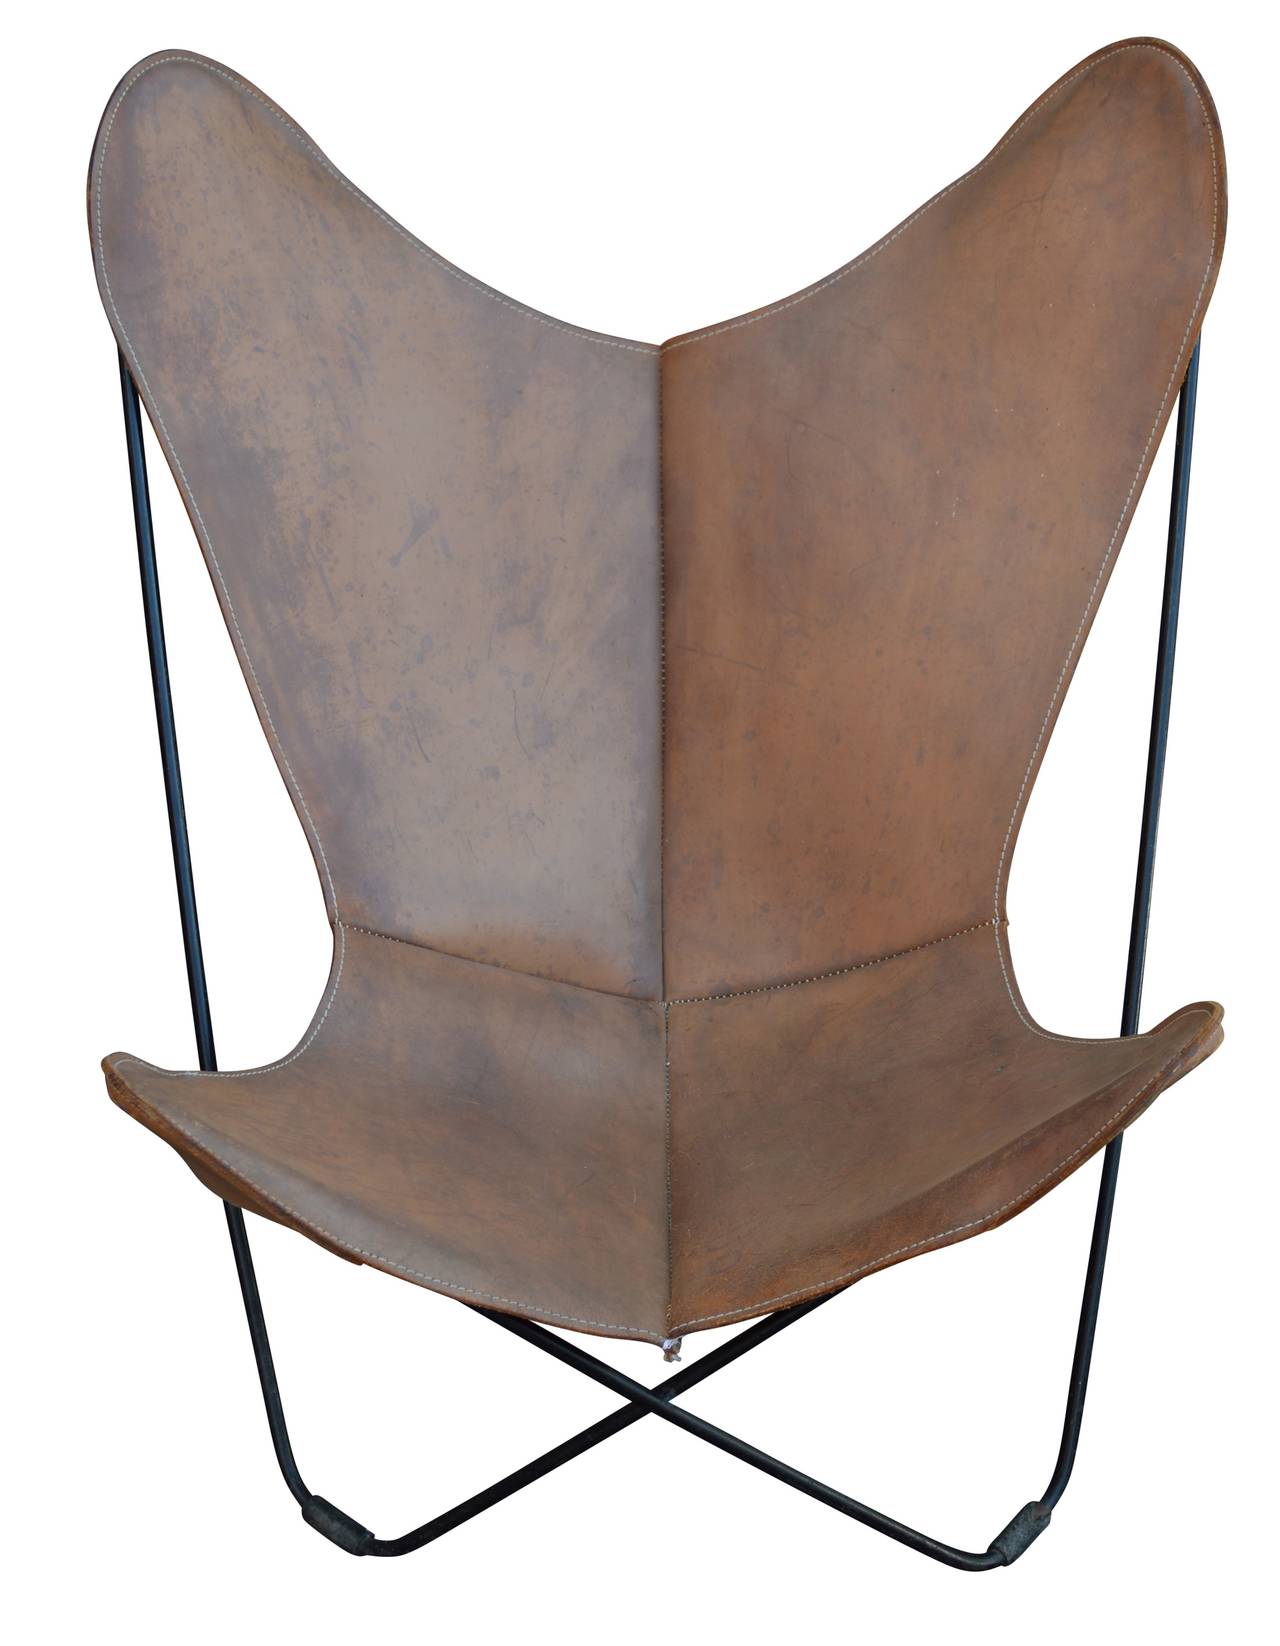 A super cool and cozy pair of butterfly chairs in thick tan leather, horse-saddle feel to them. Unique patina and black painted metal frame.